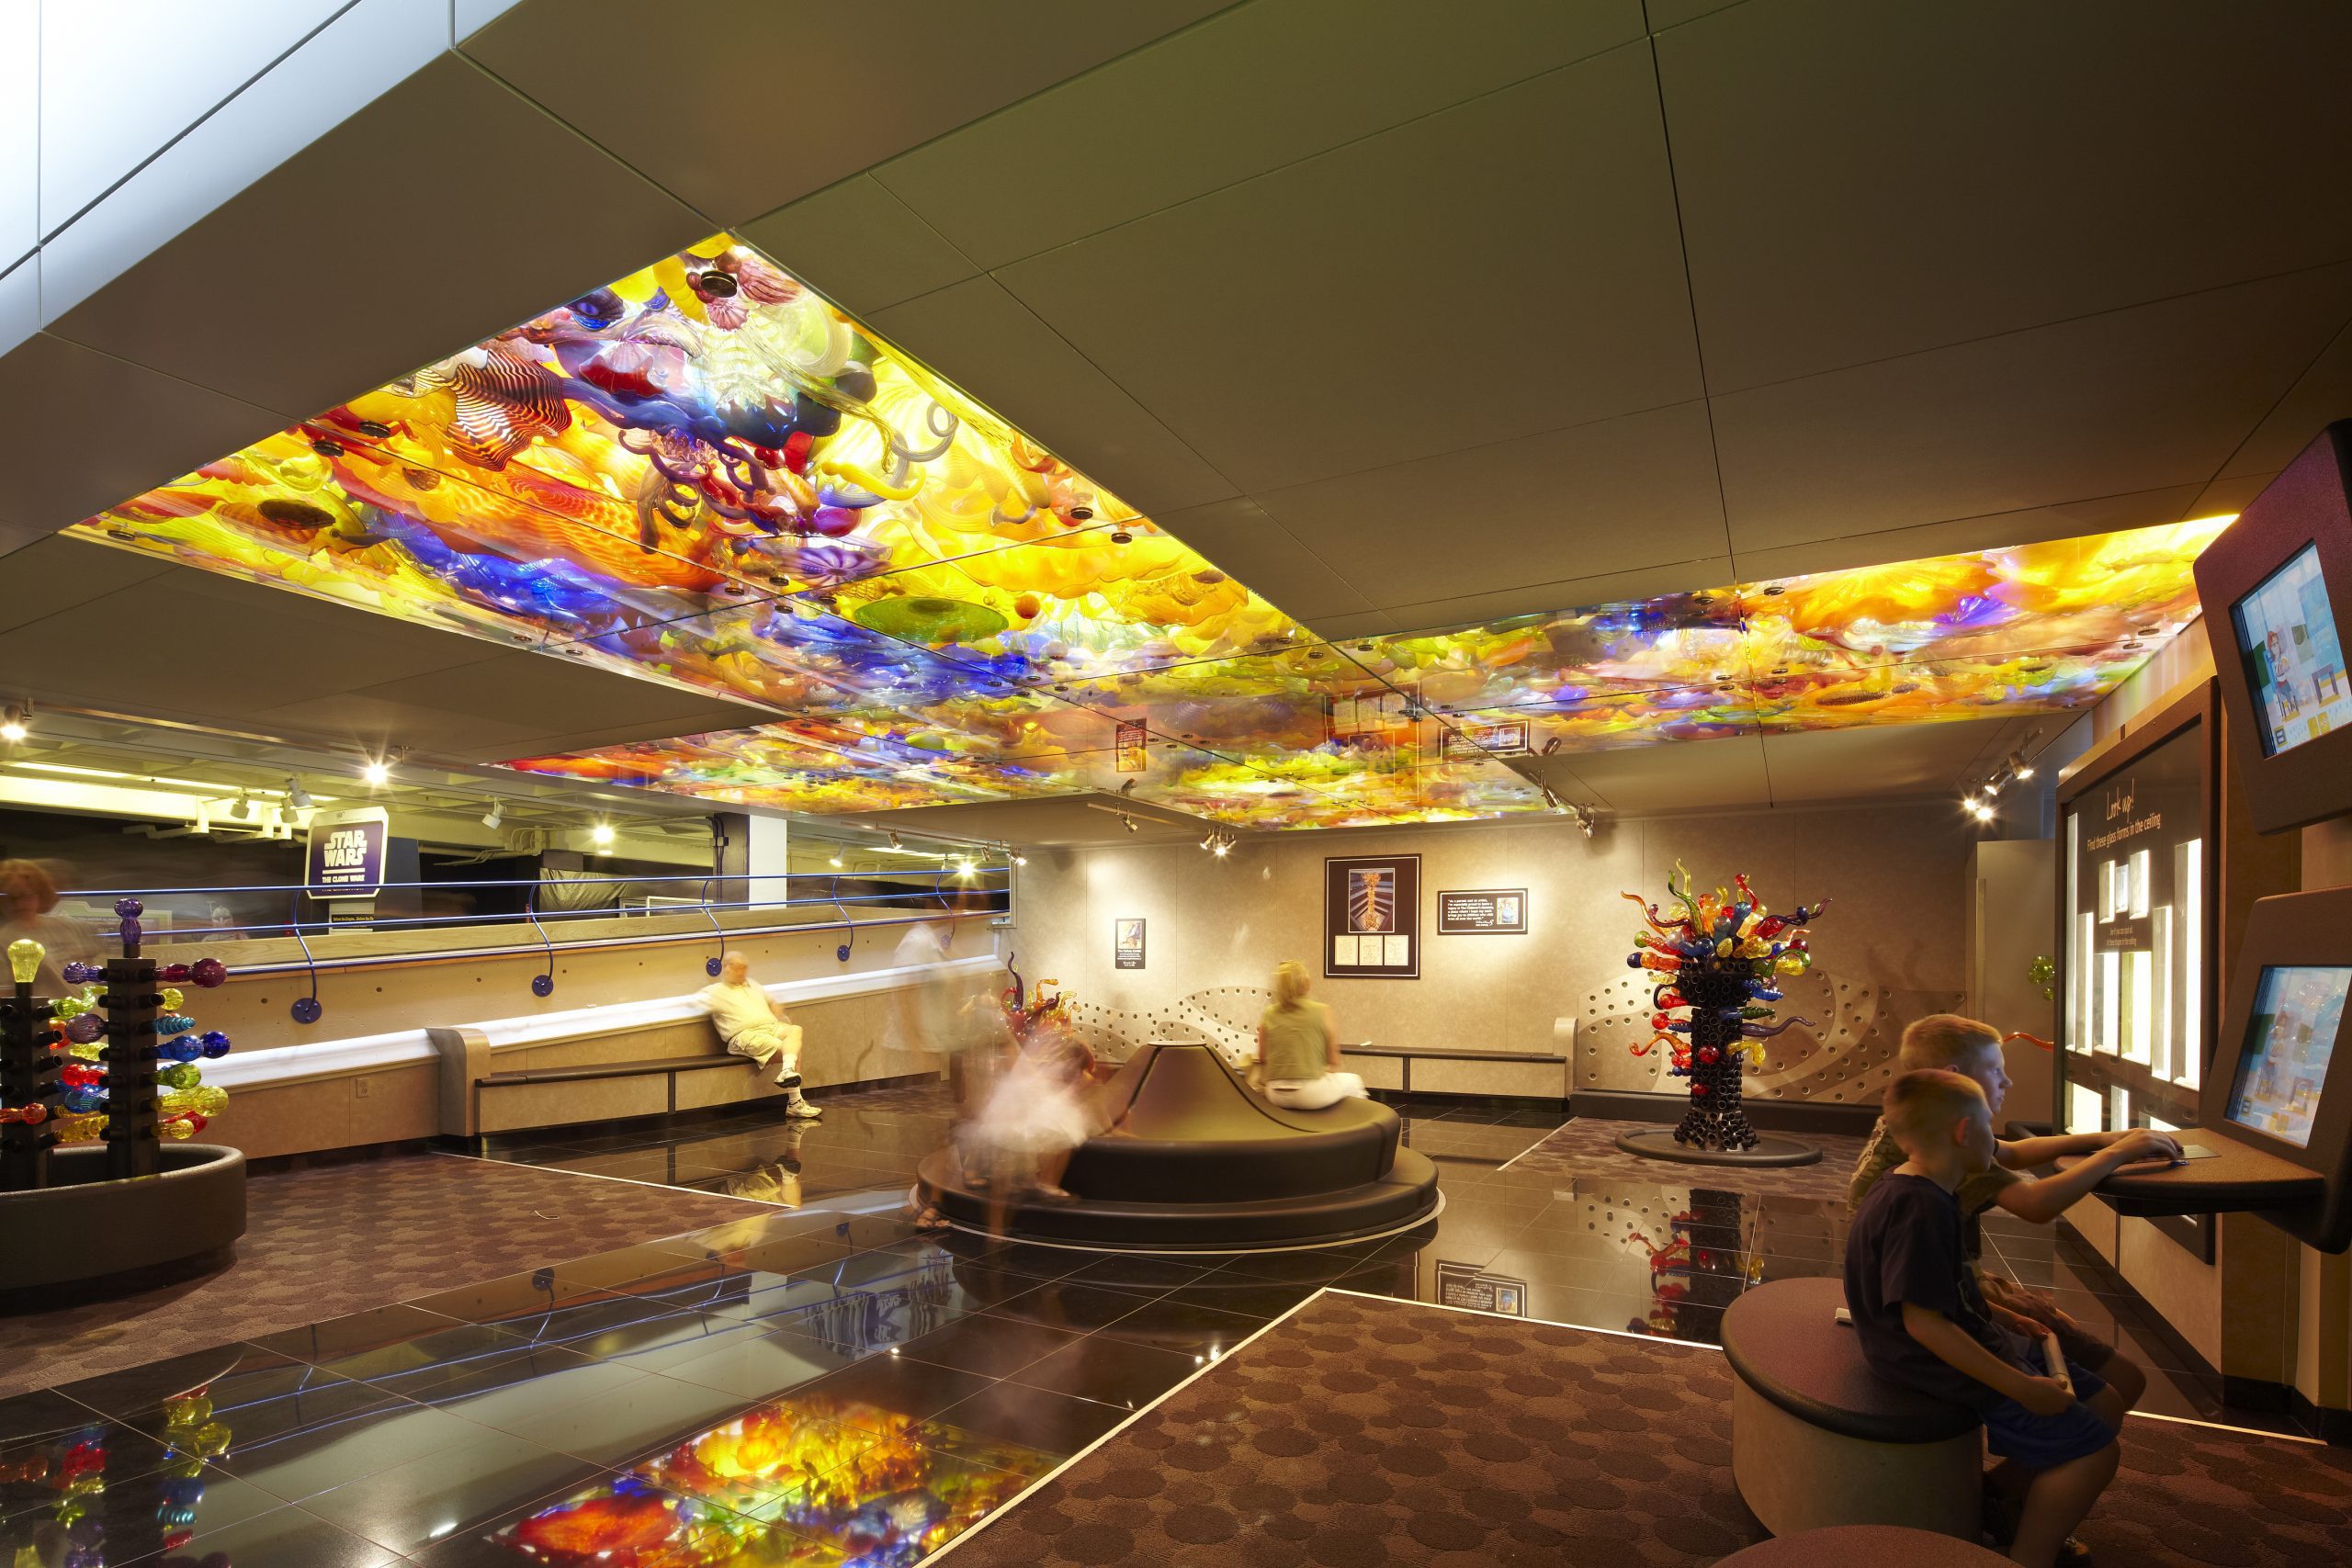 The Children's Museum of Indianapolis: Chihuly Sculpture Platform